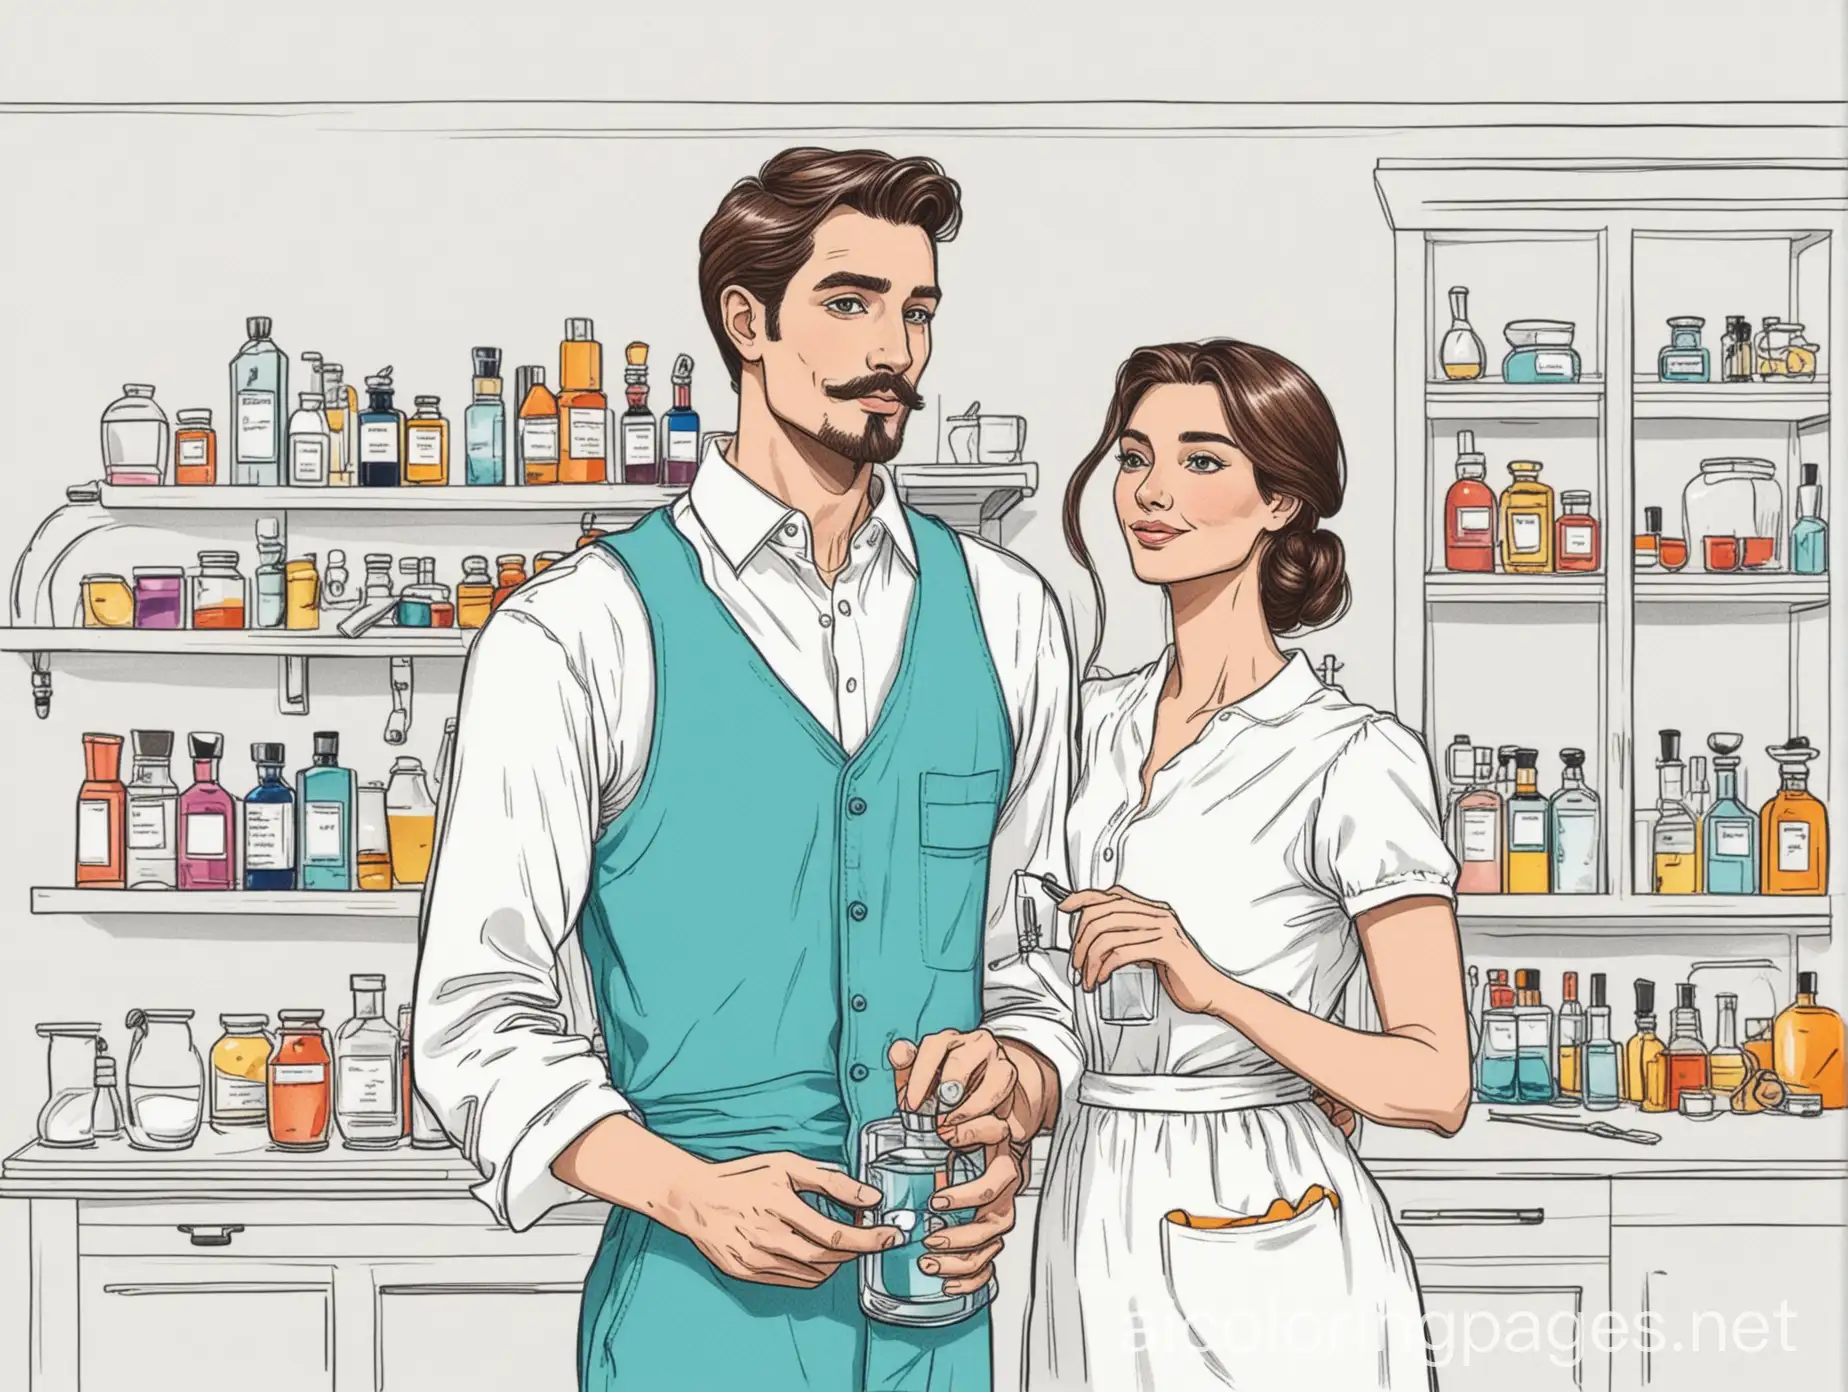 Illustration of a man who works as a perfumer and lives with his wife in a house in bright, clear colors, Coloring Page, black and white, line art, white background, Simplicity, Ample White Space. The background of the coloring page is plain white to make it easy for young children to color within the lines. The outlines of all the subjects are easy to distinguish, making it simple for kids to color without too much difficulty